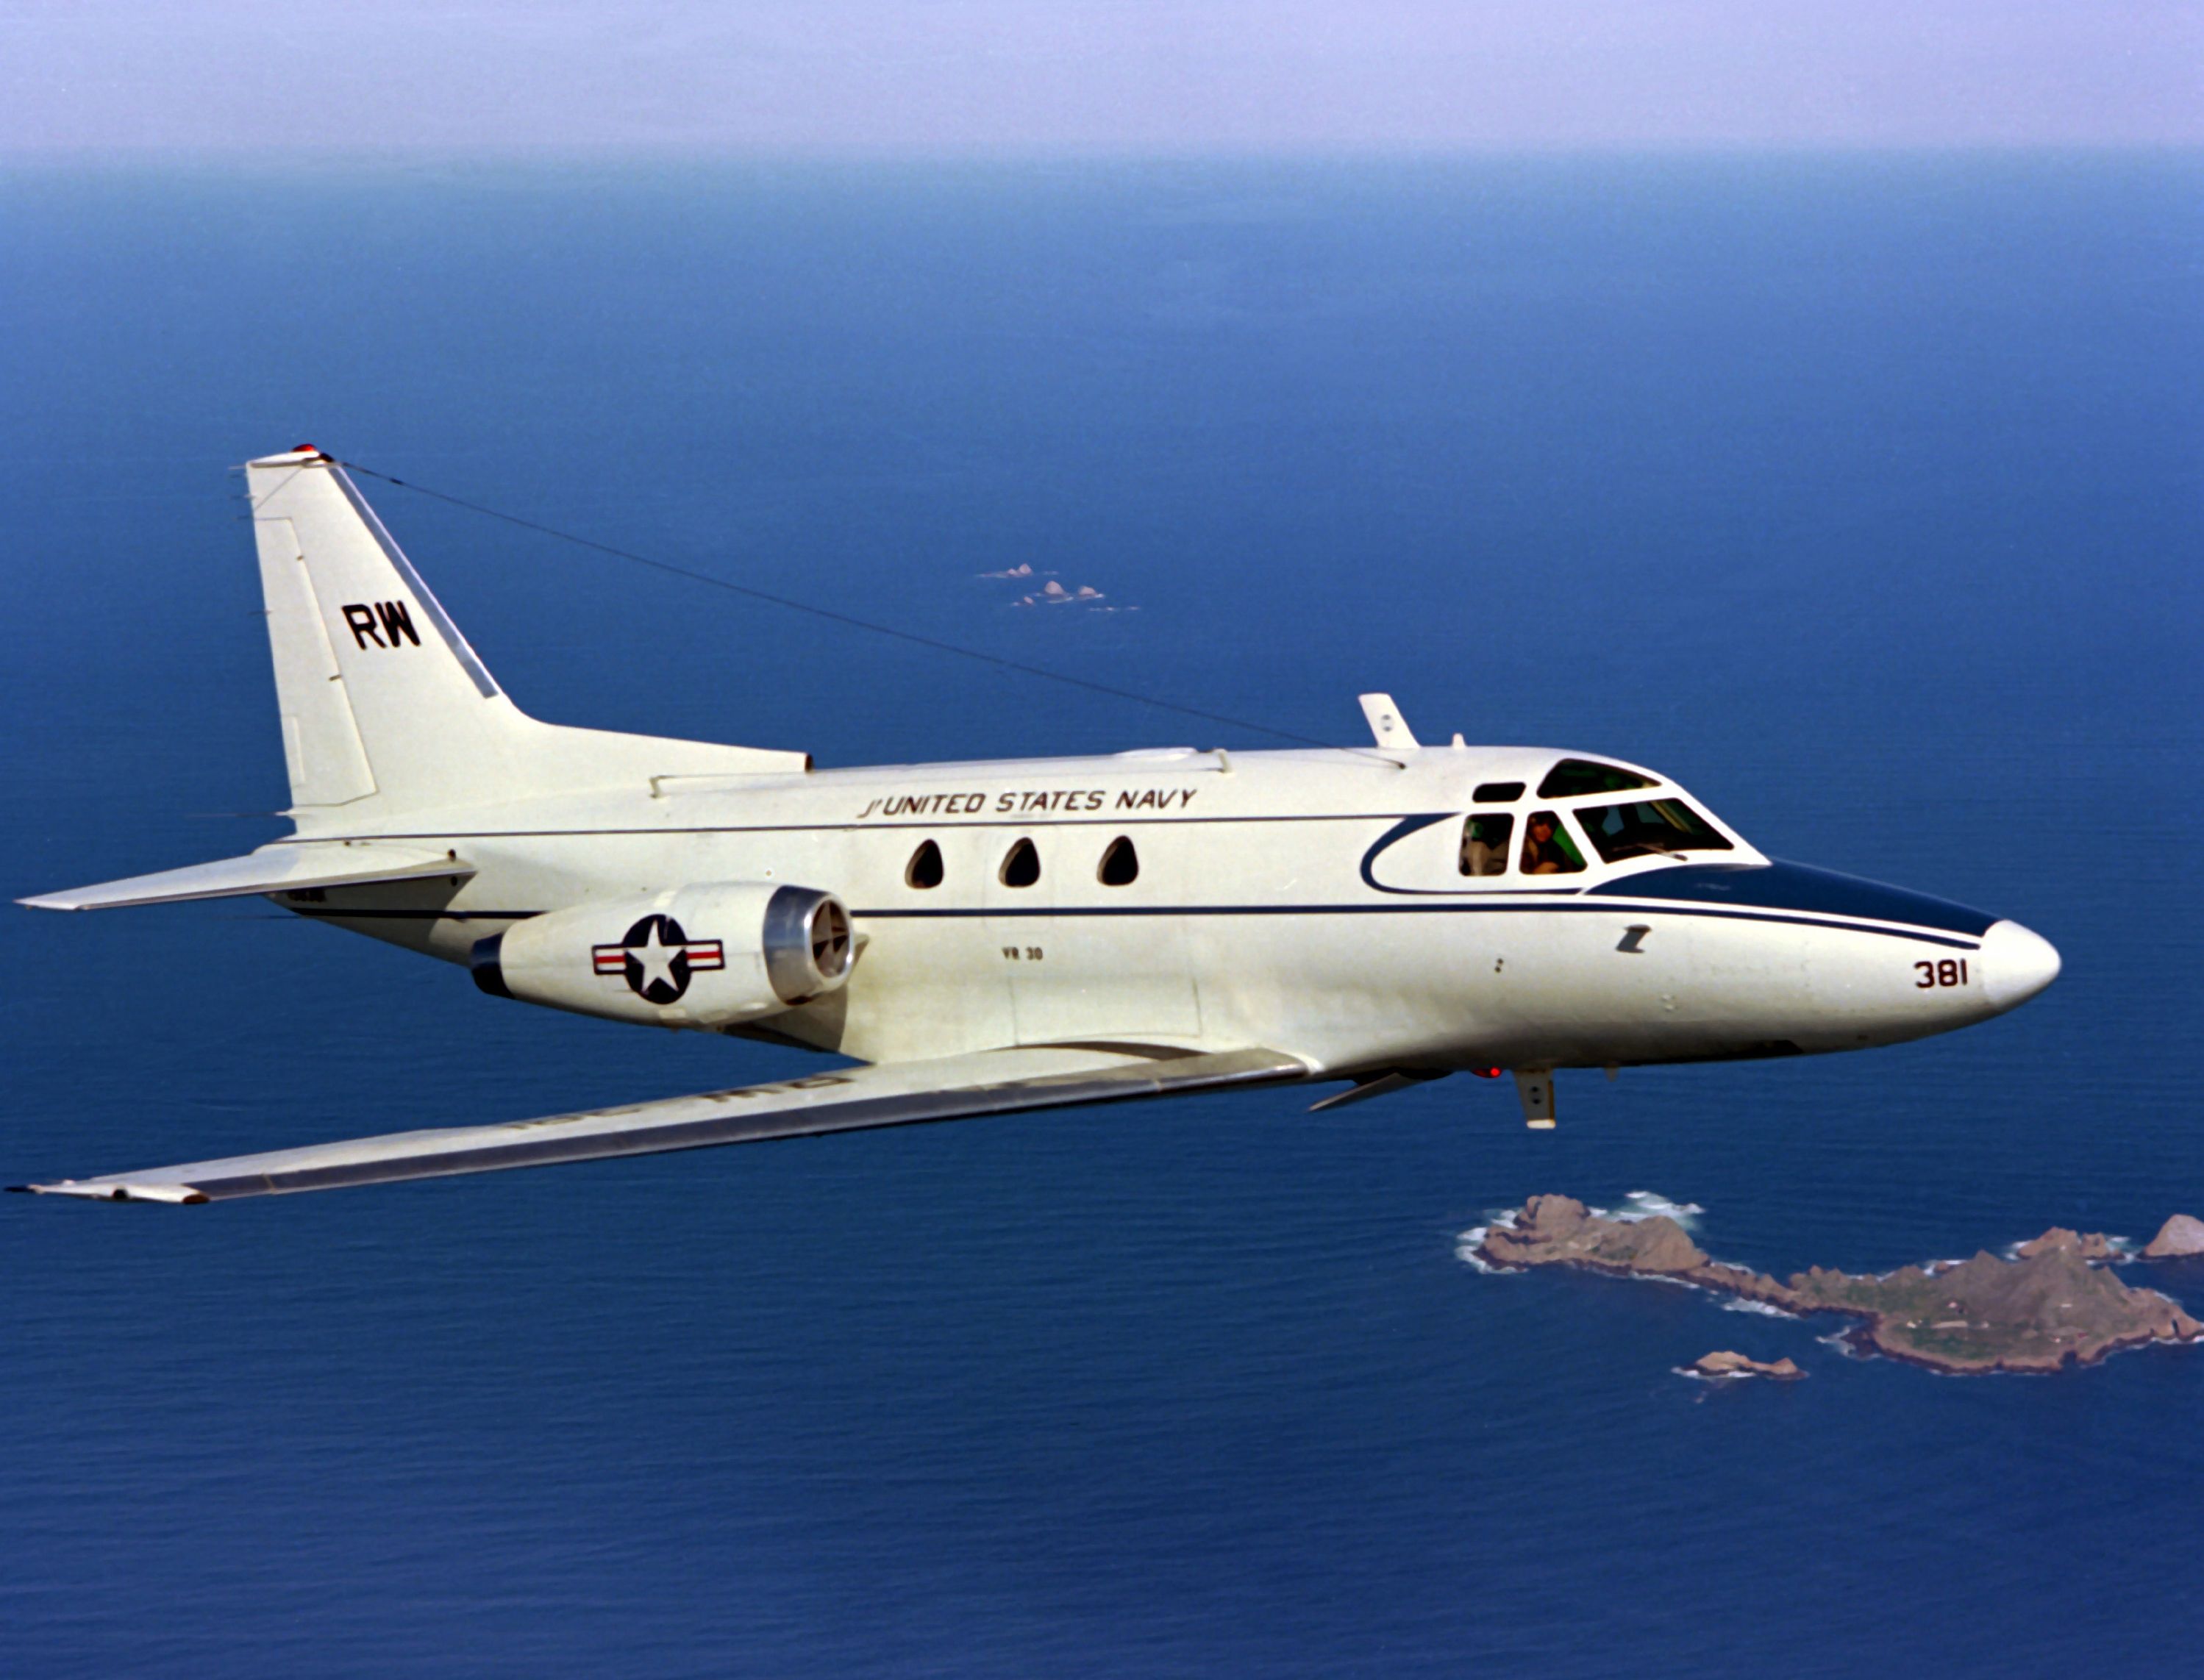 A CT-39E Sabreliner in flight over some islands.